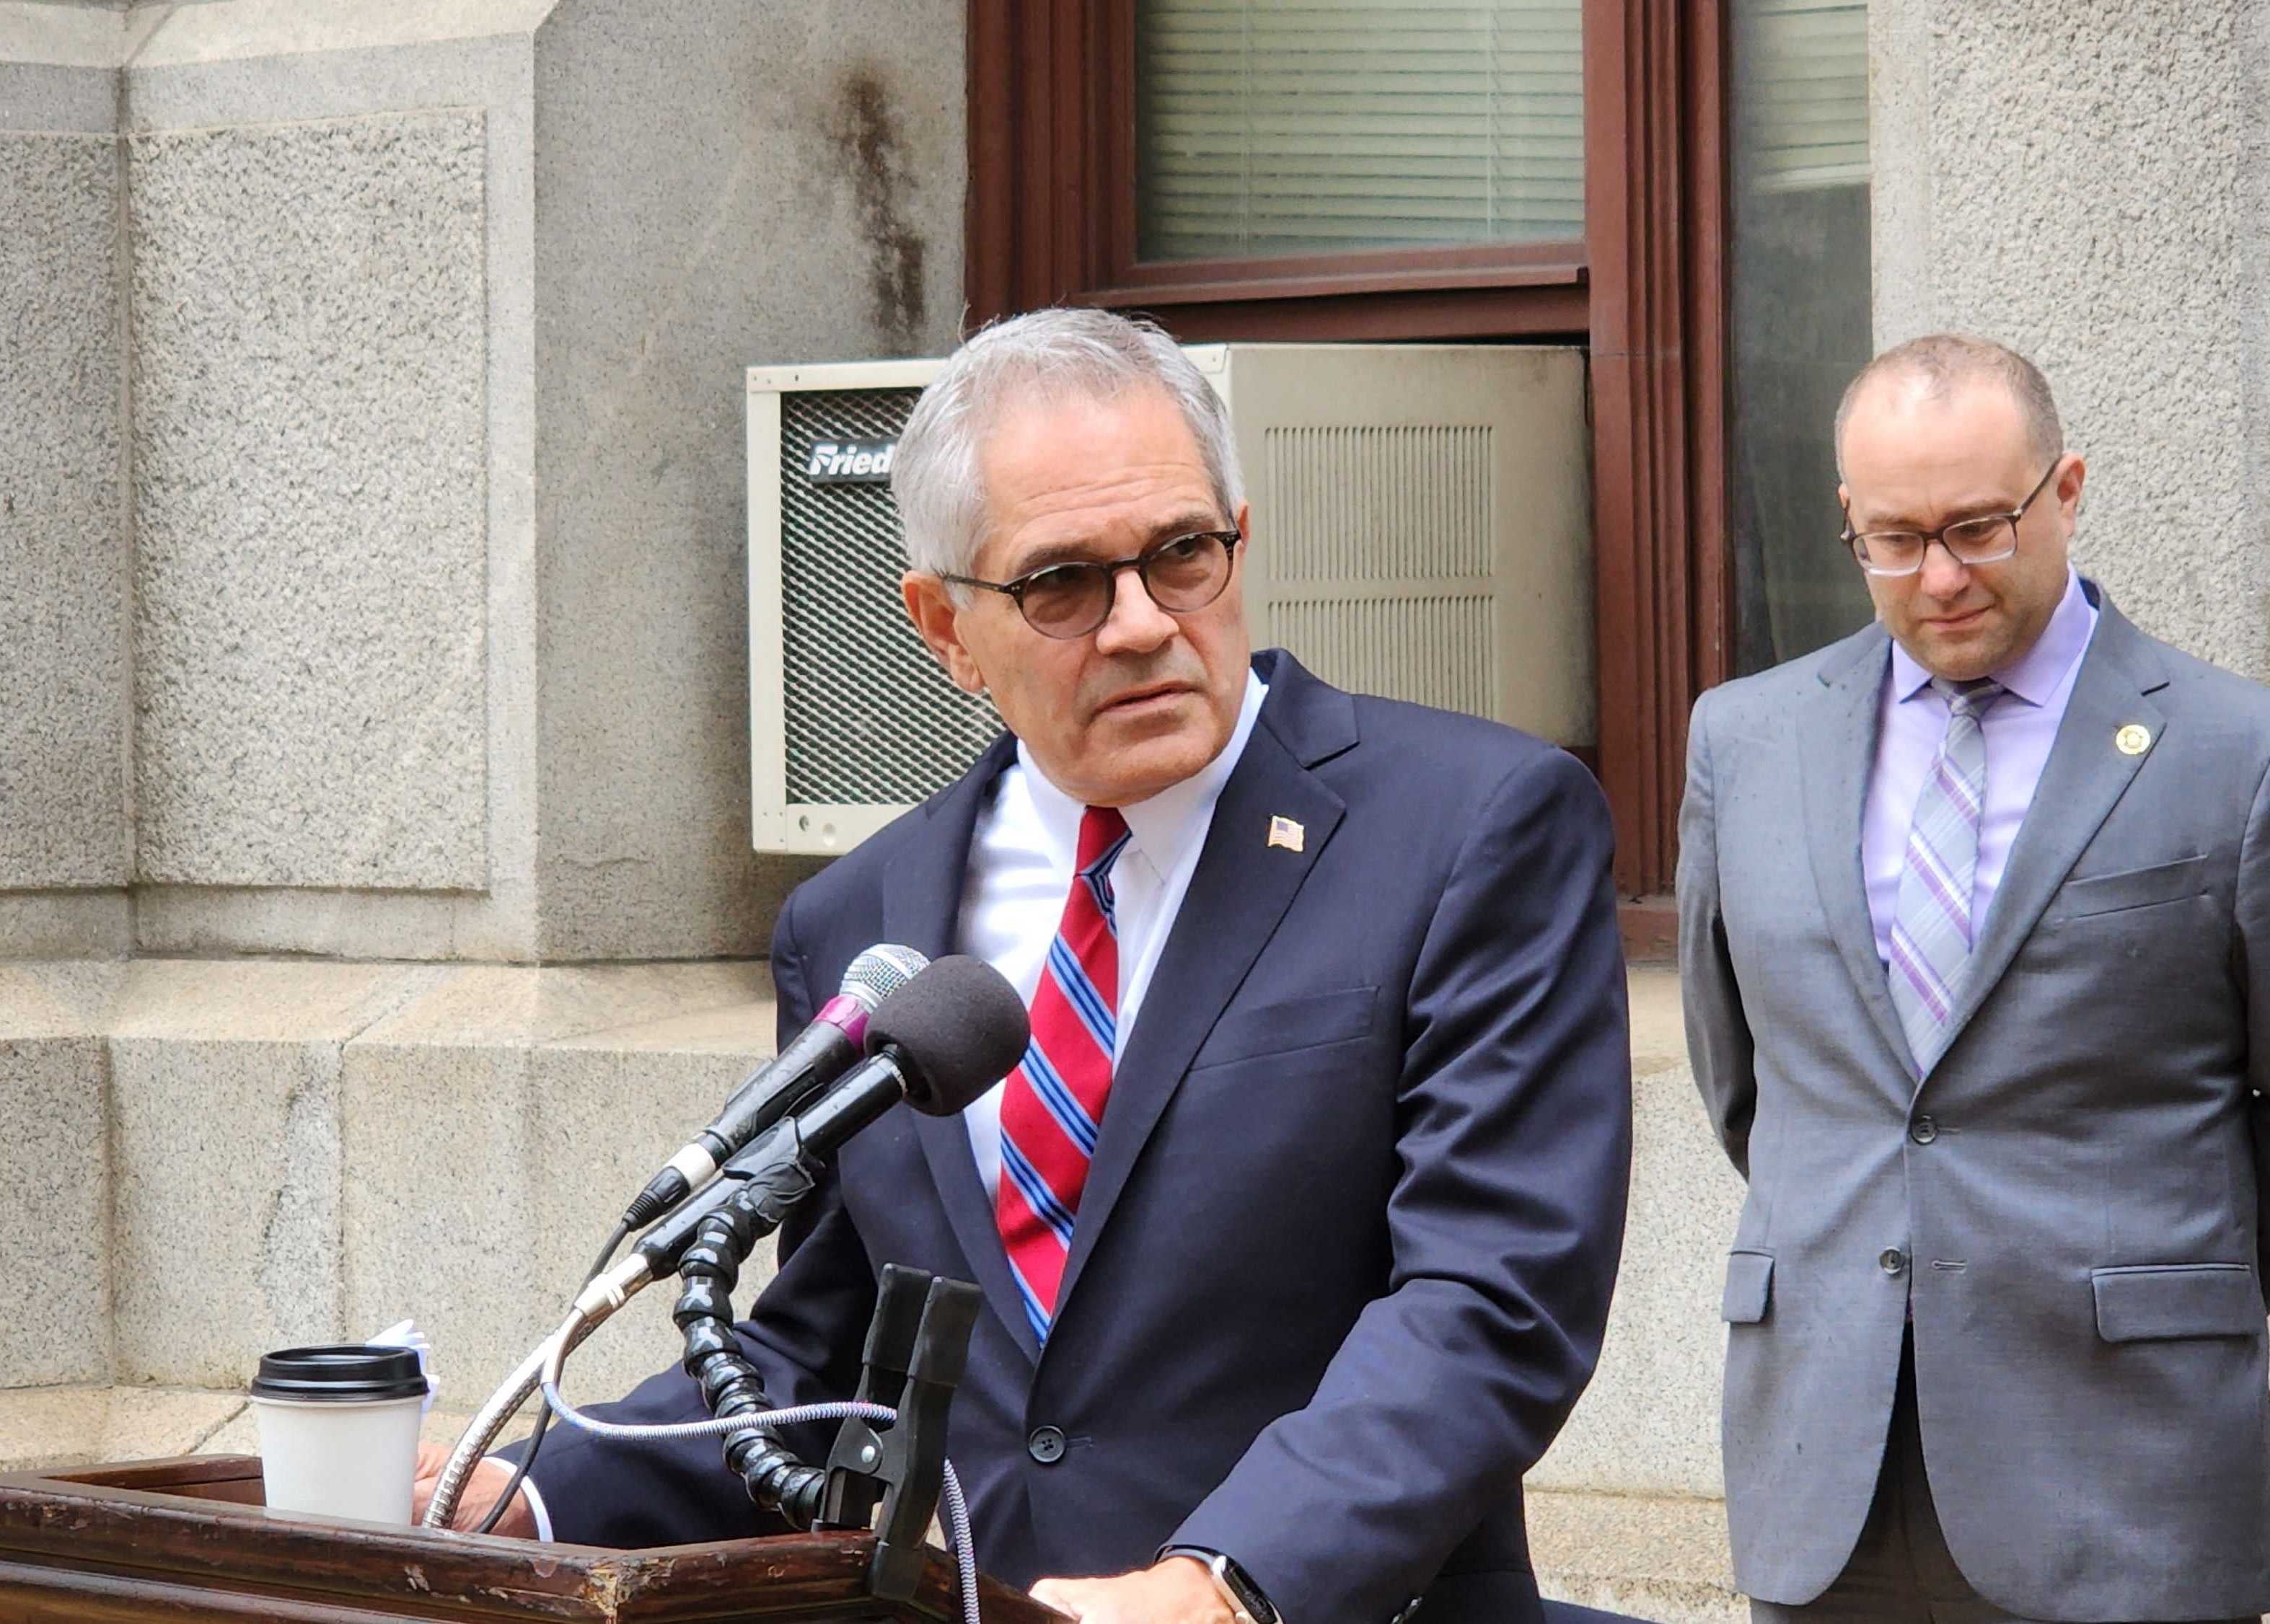 After 2020 Election Day threats, Philly DA Krasner calls for election security reform